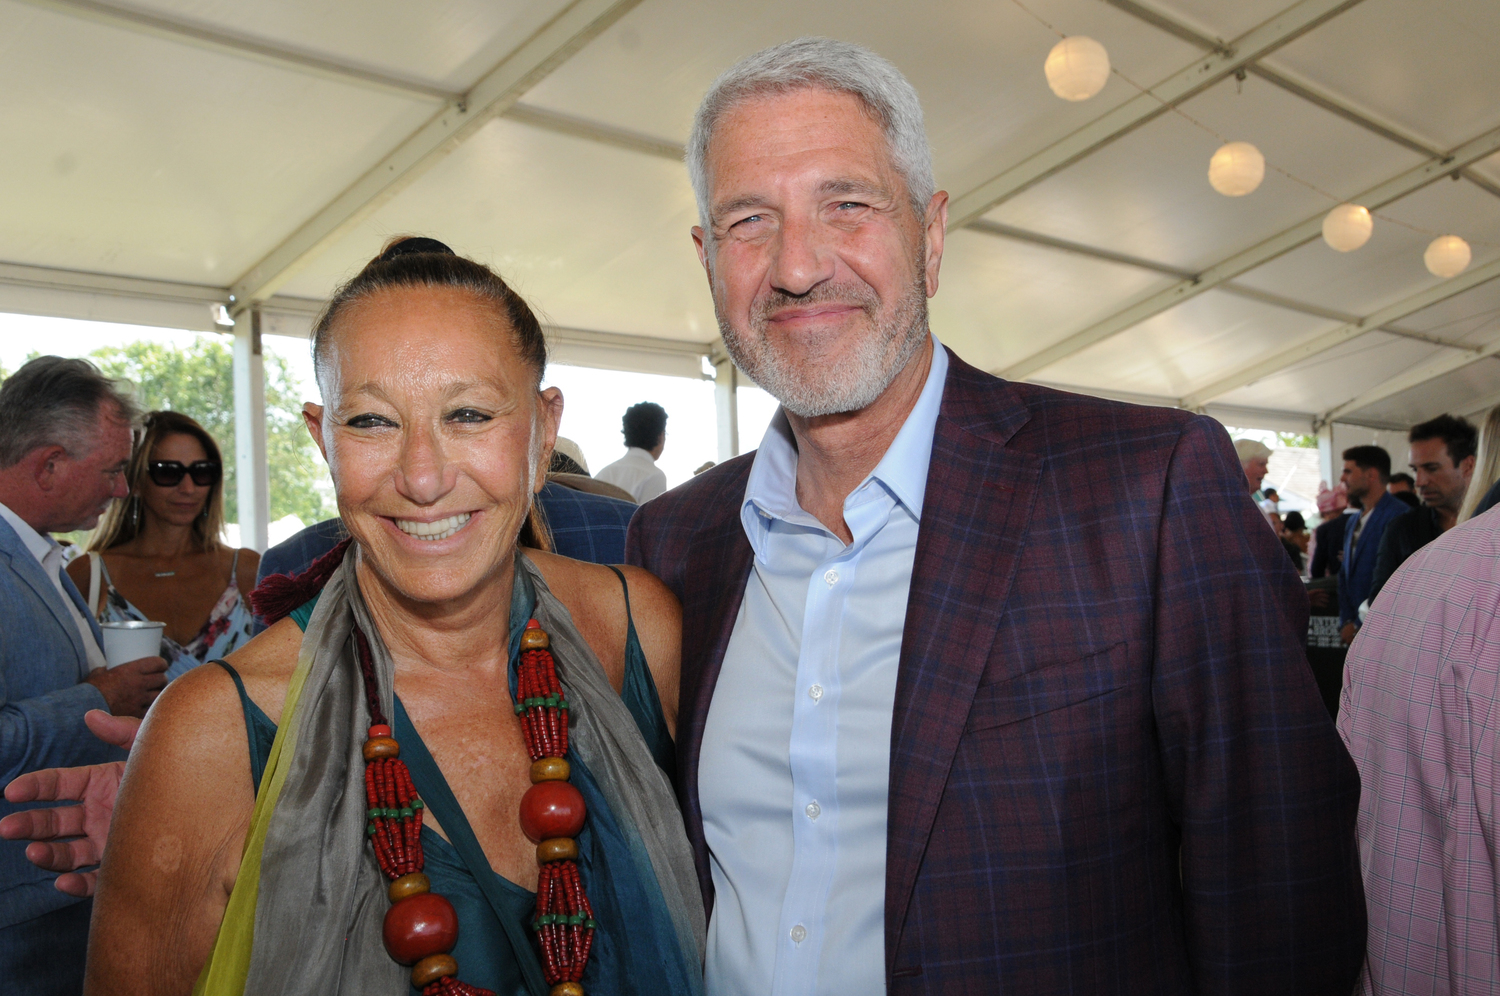 Donna Karan and Frank Sorrentino in the VIP Tent at the Grand at the Hampton Classic Horse Show on Sunday.     RICHARD LEWIN